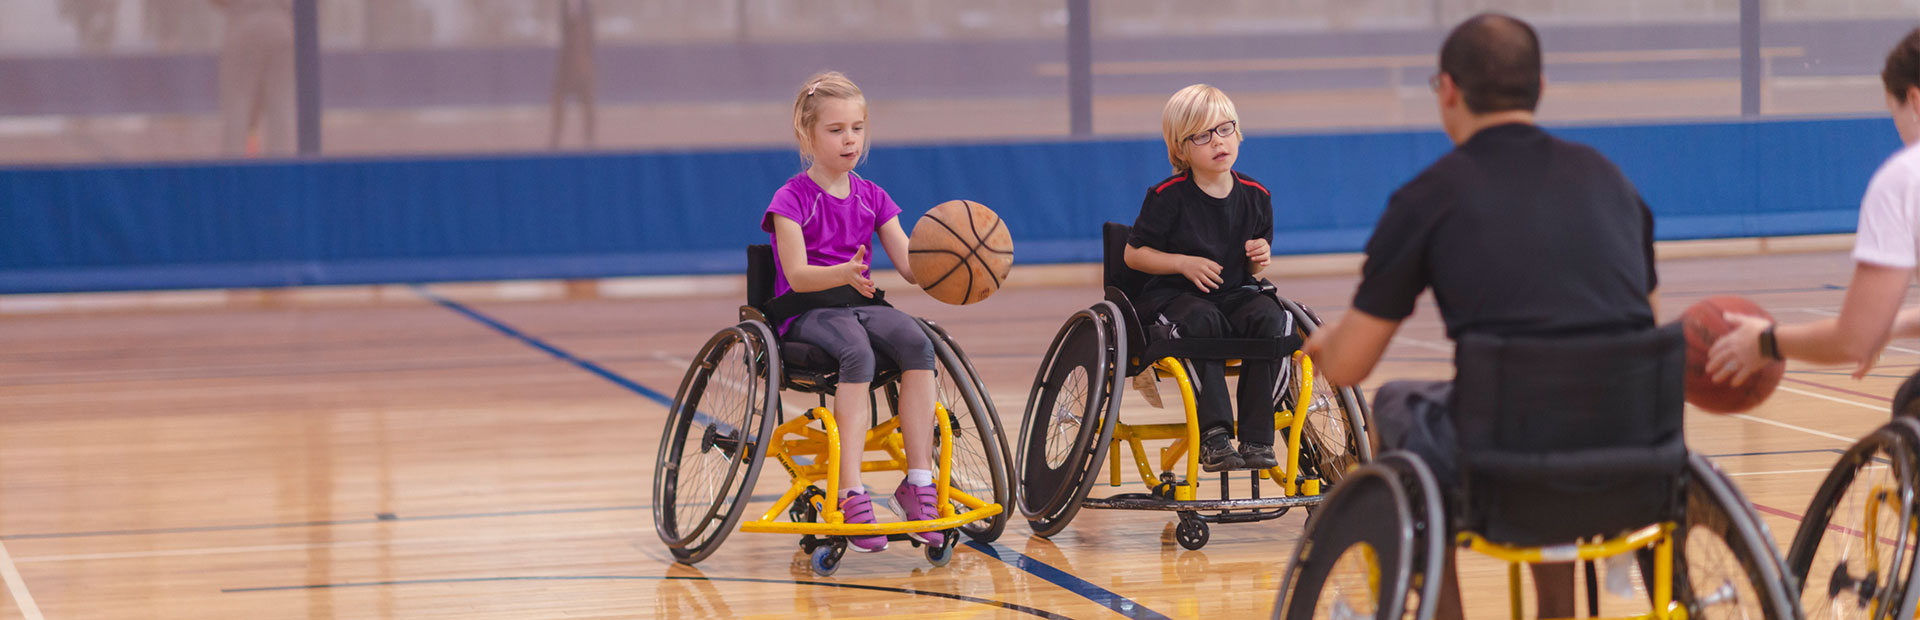 A photo of children in wheelchairs playing basketball